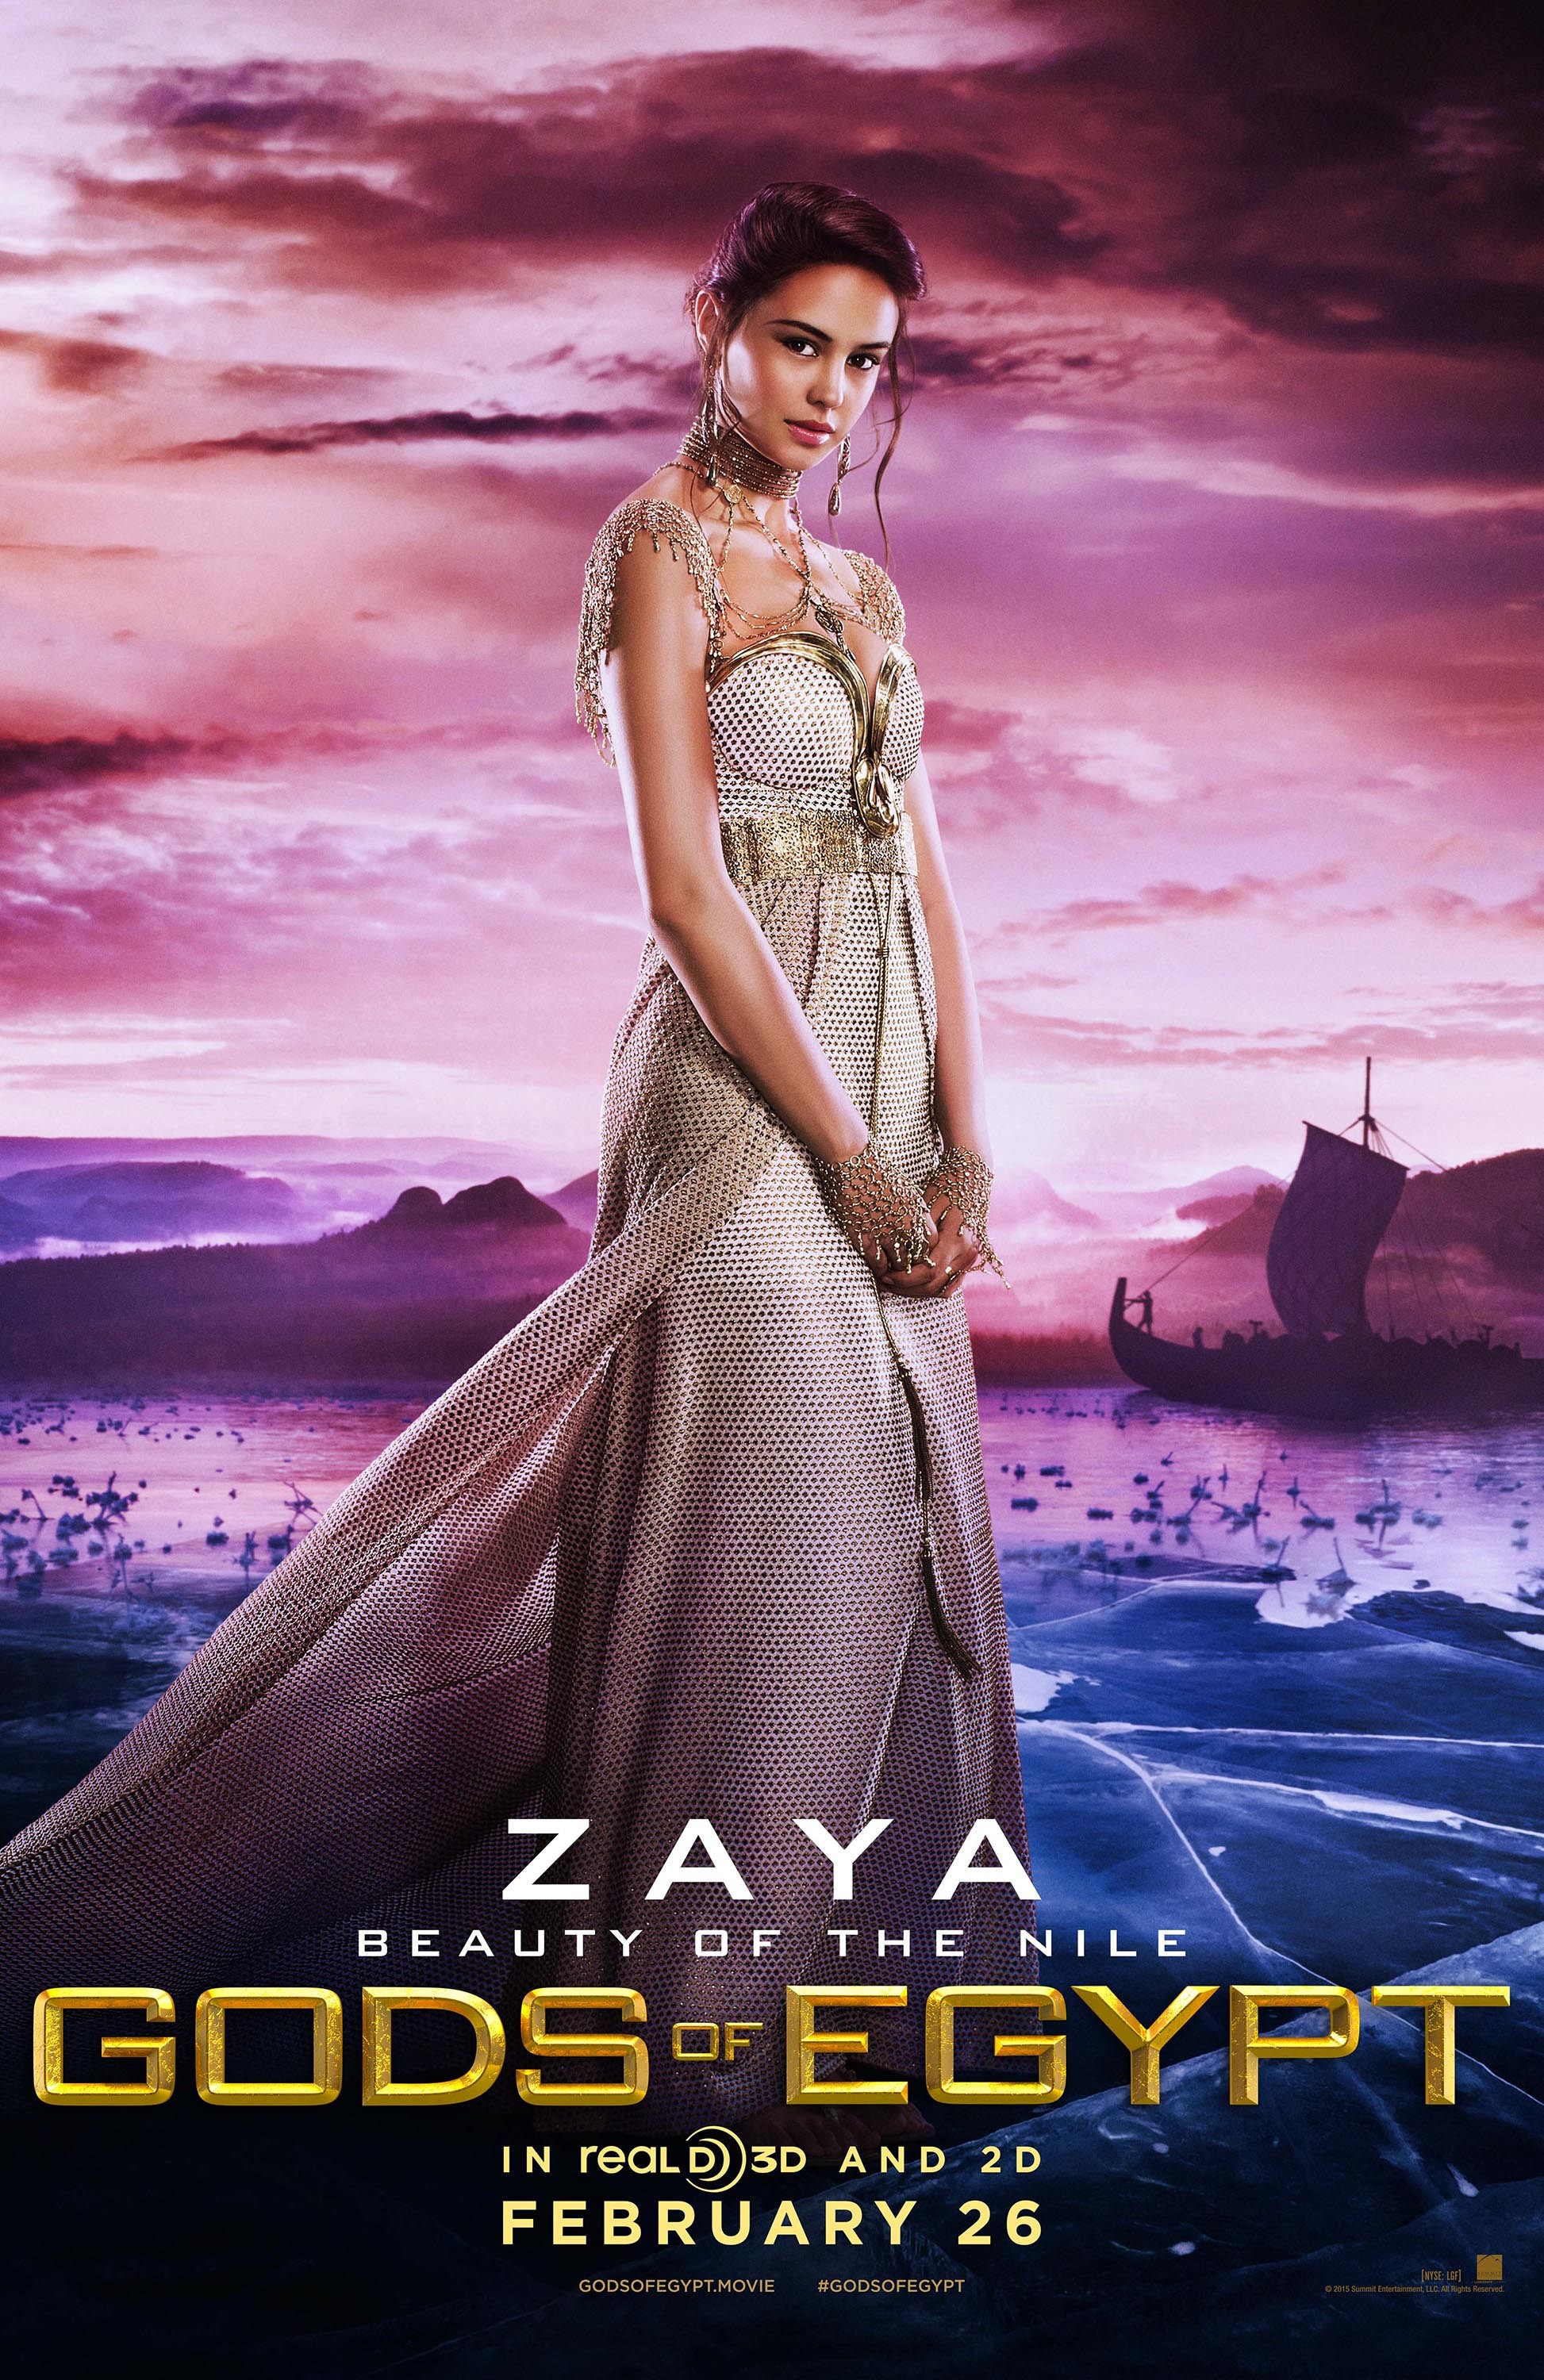 Gods of Egypt images Zaya Poster HD wallpaper and background photos